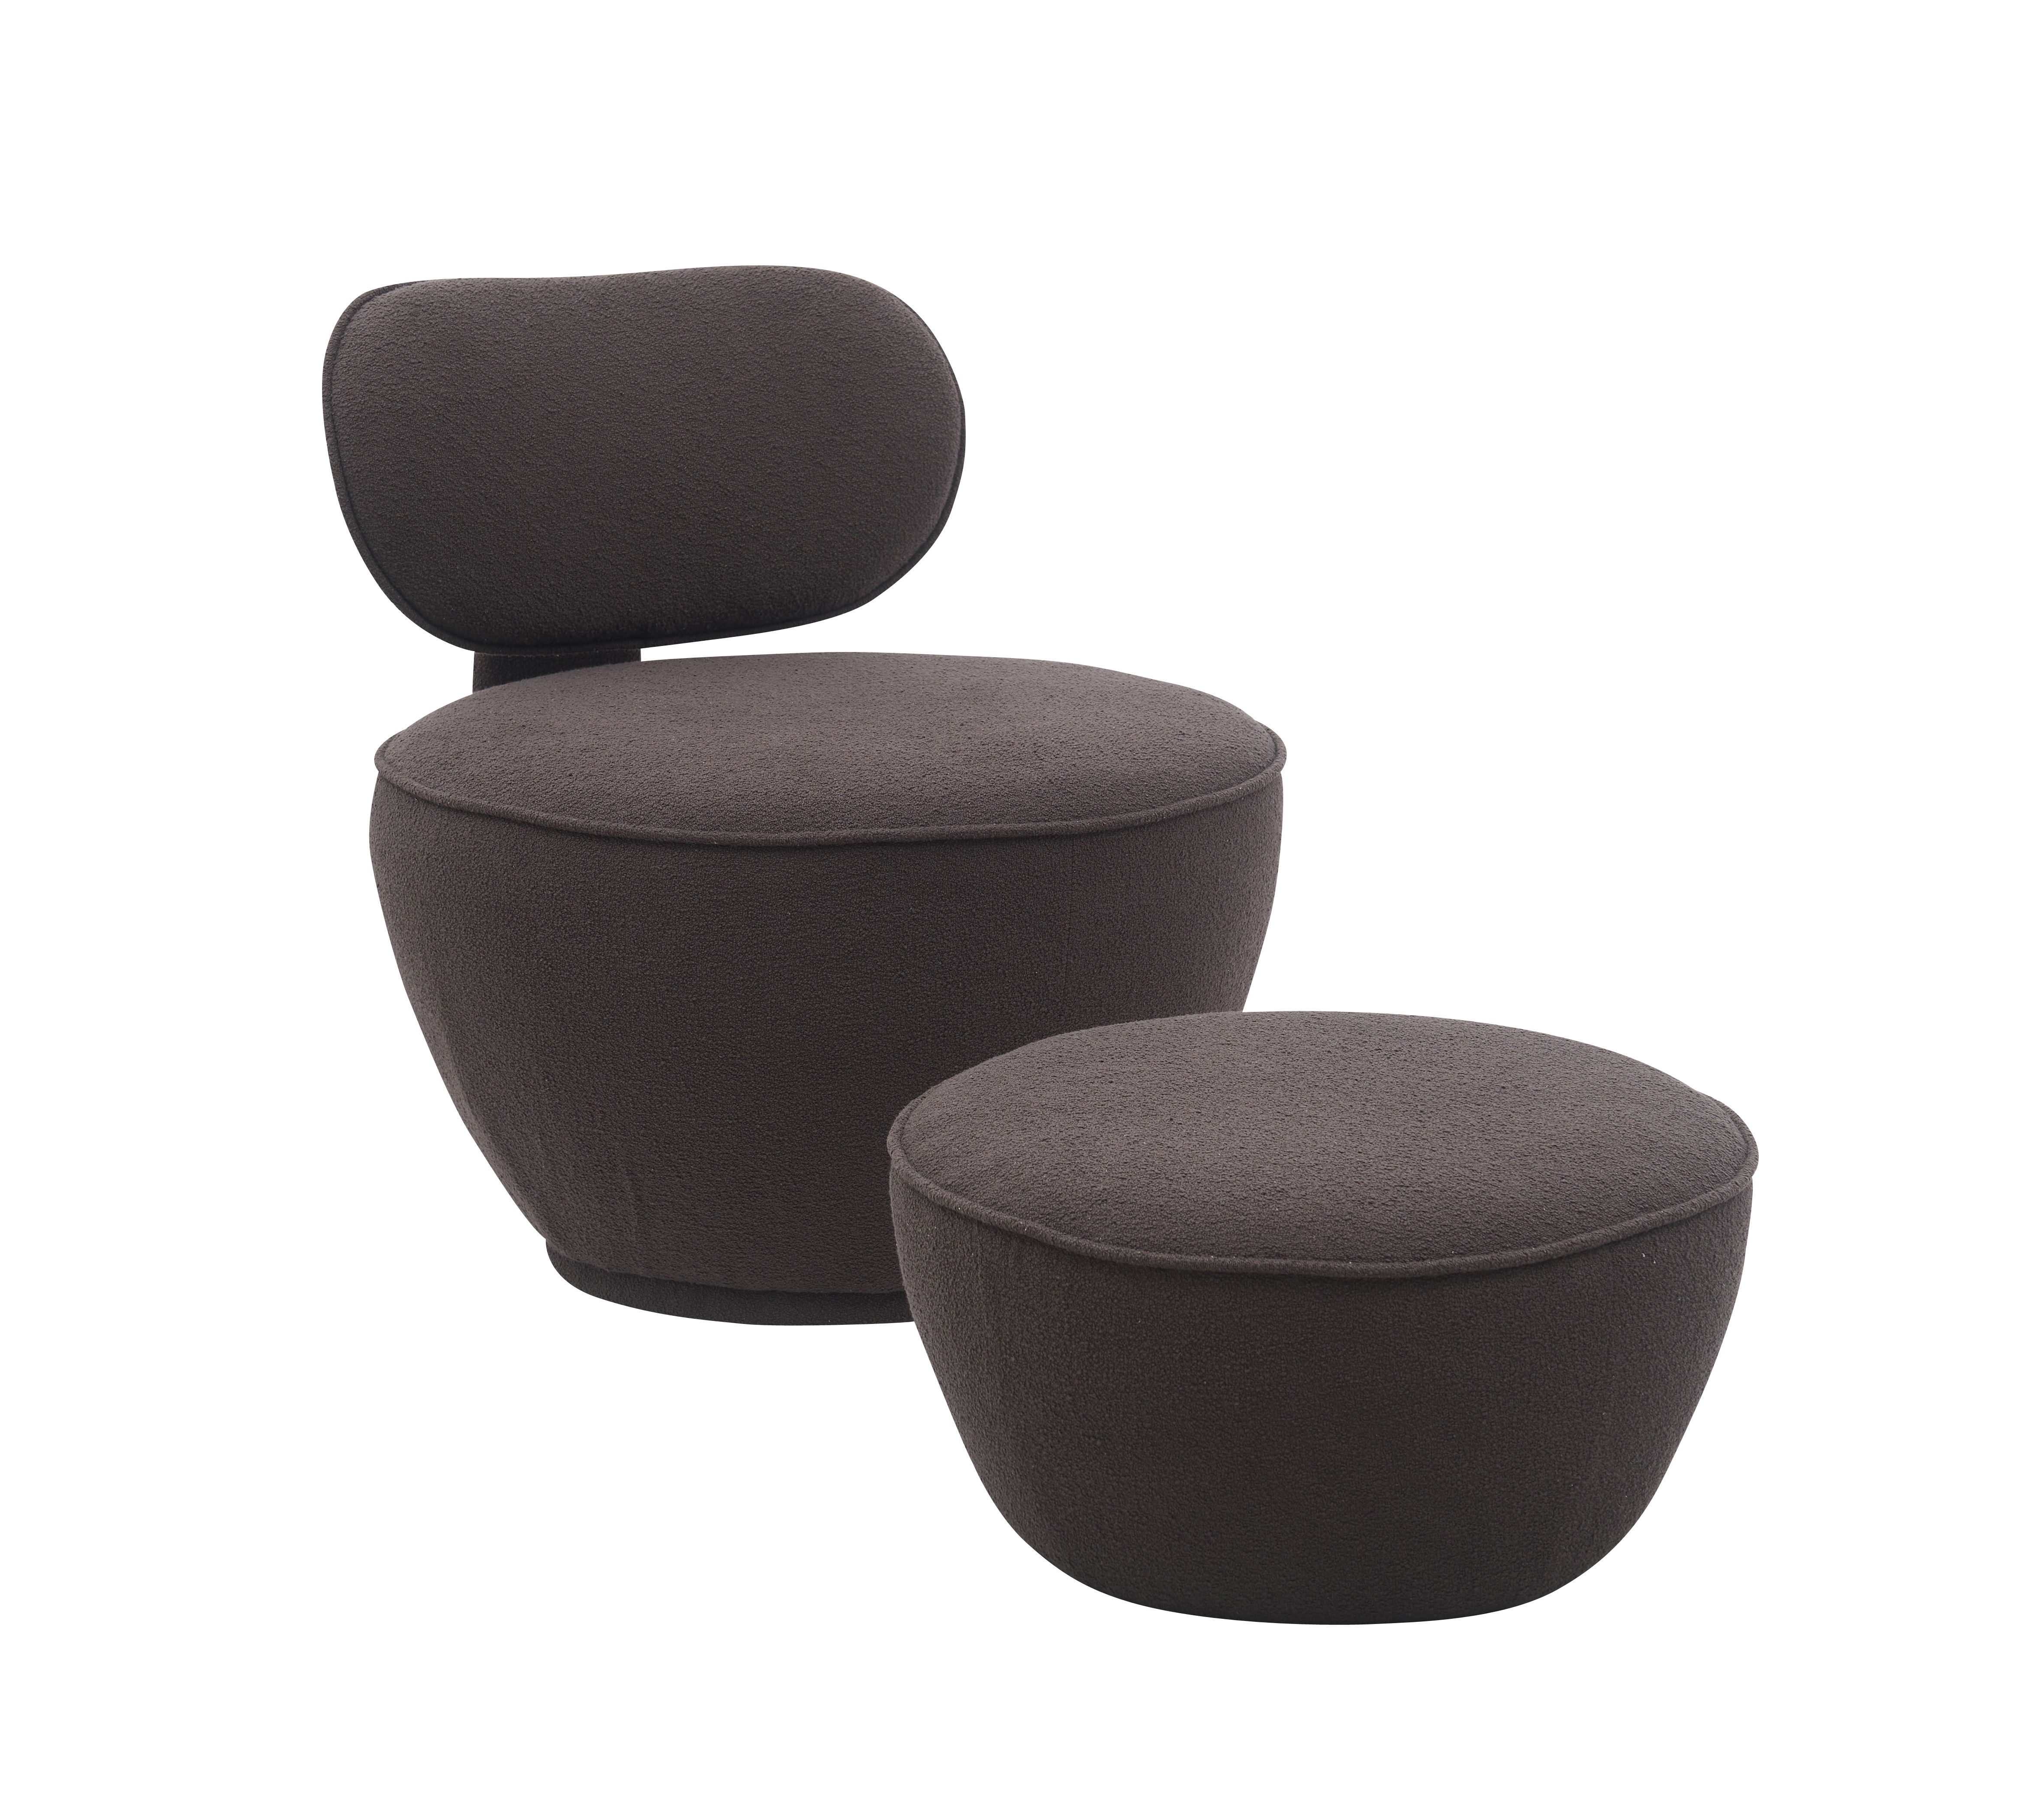 SHINERUN New Model Living Room Chair Modern Leisure Designer Furniture Accent Chair With Ottoman